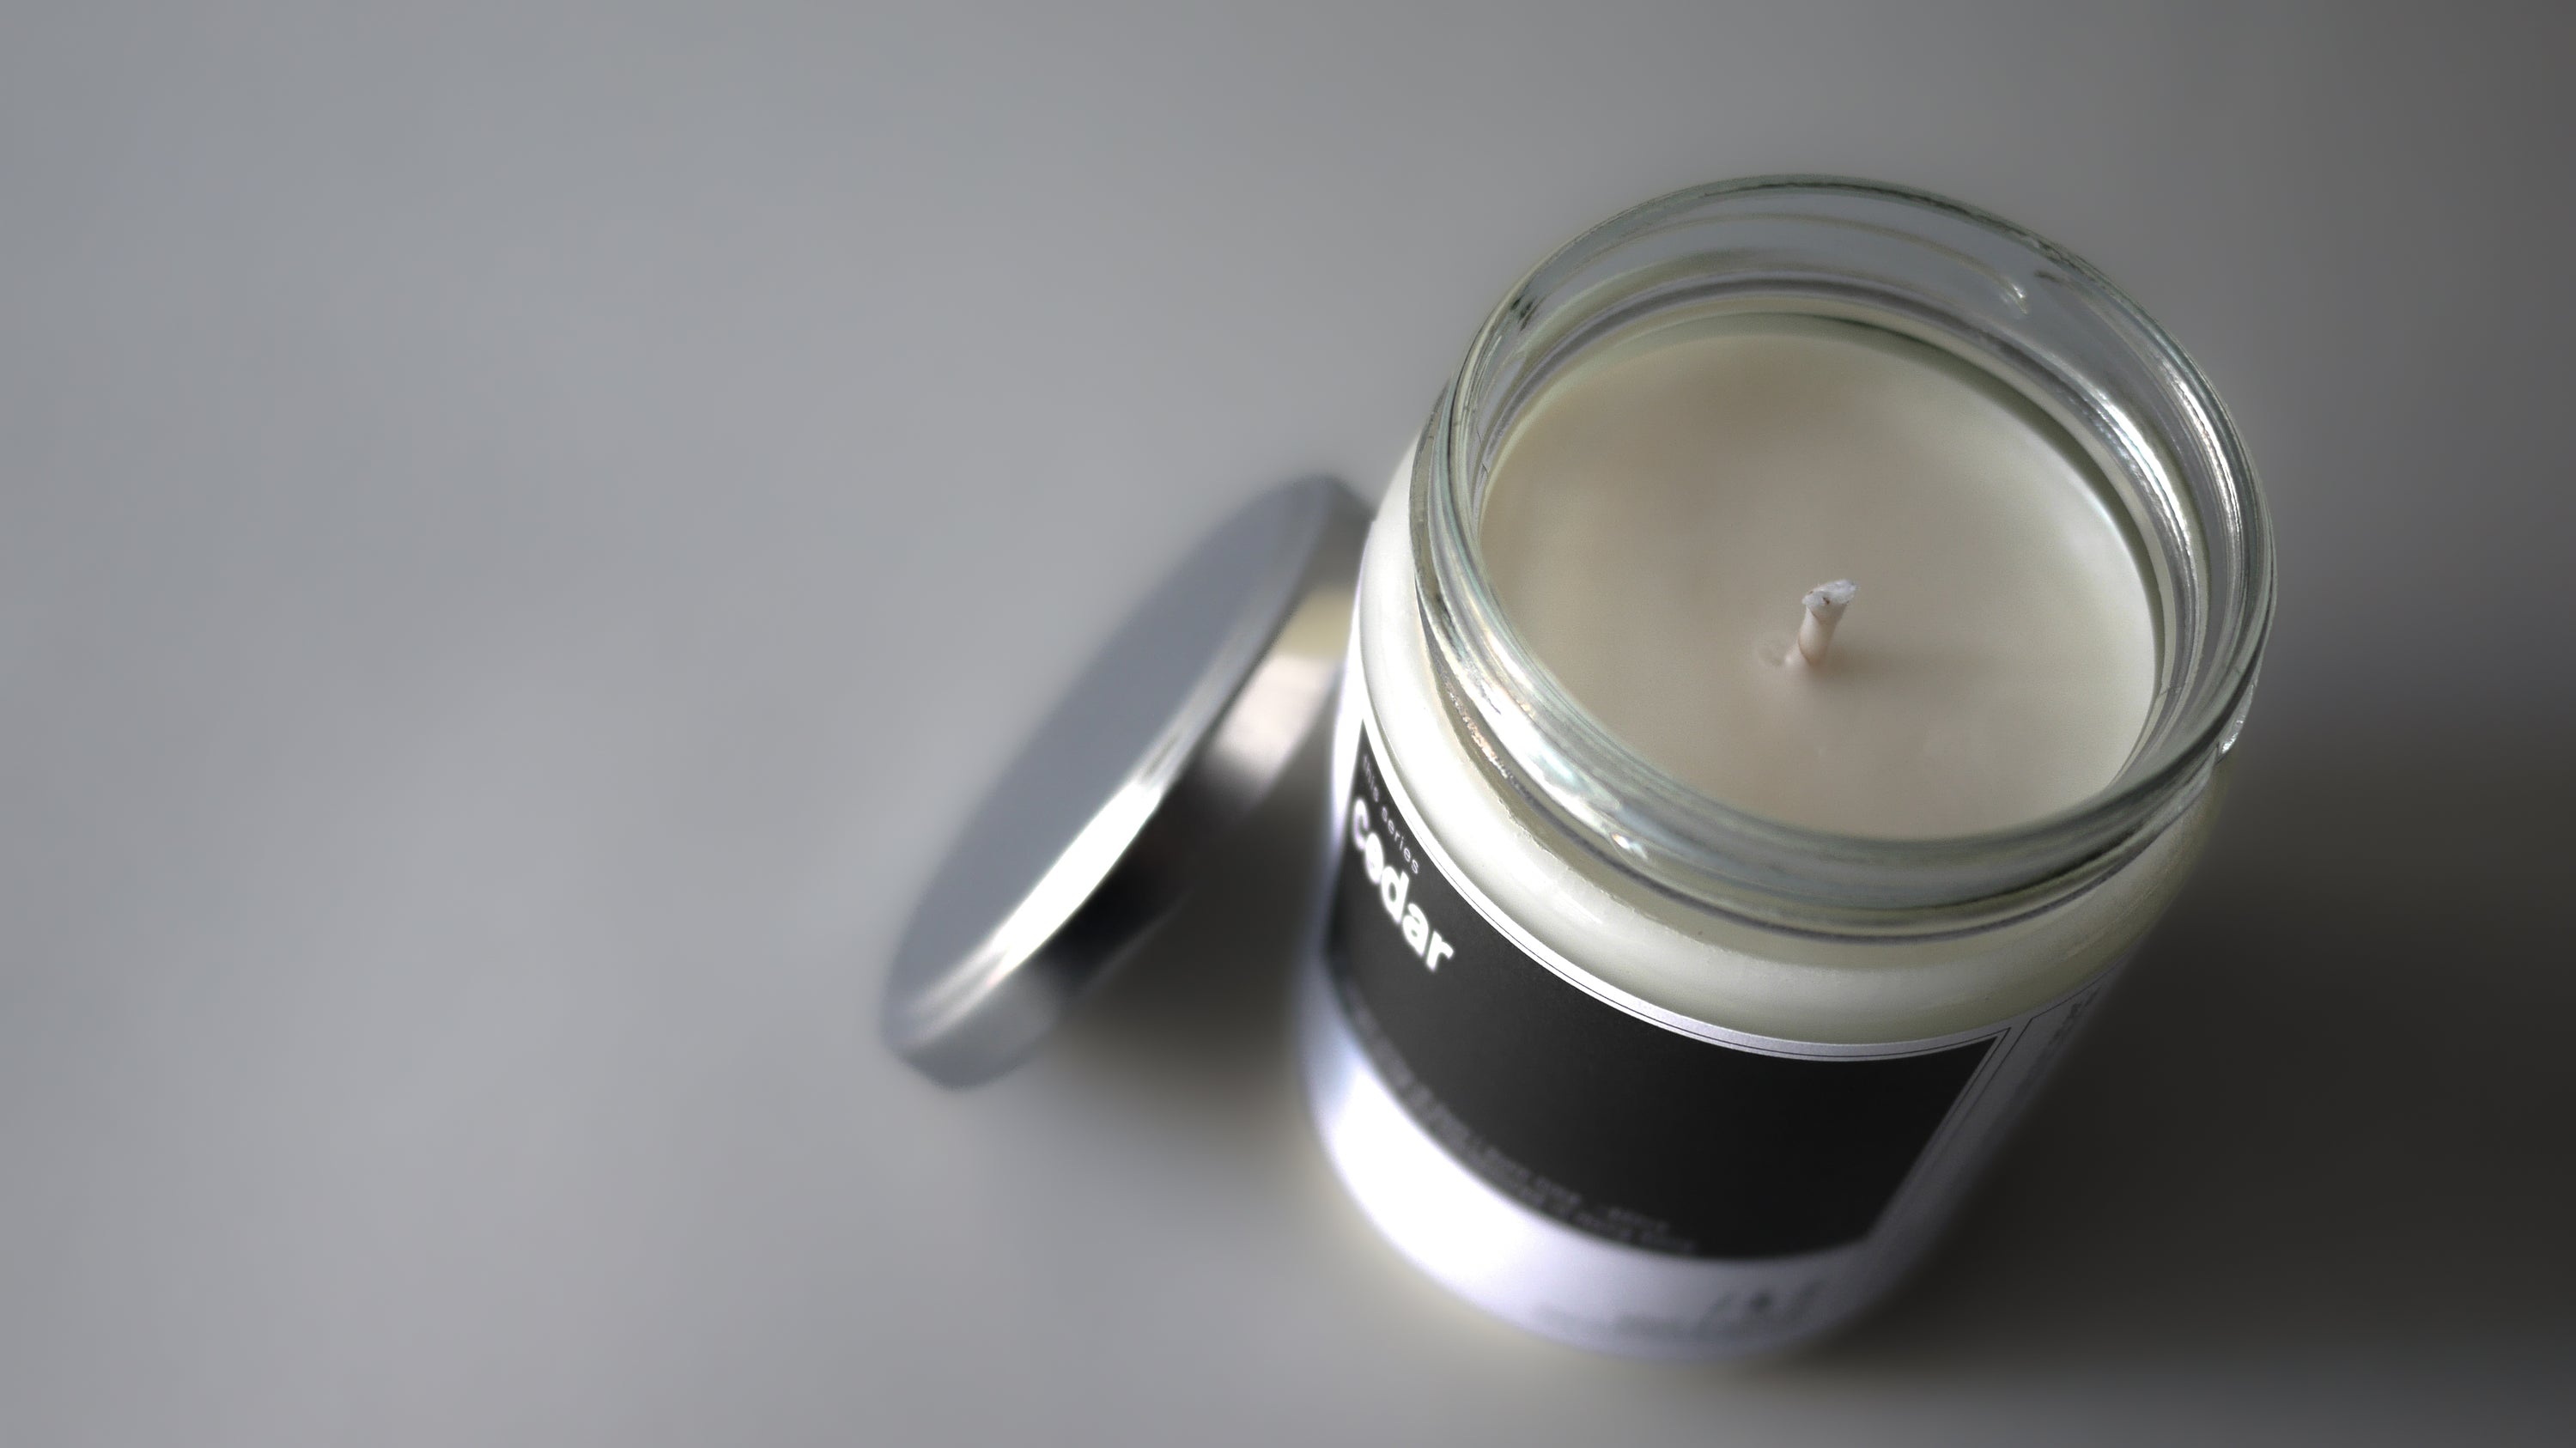 cedar / scented candle 270g // this series